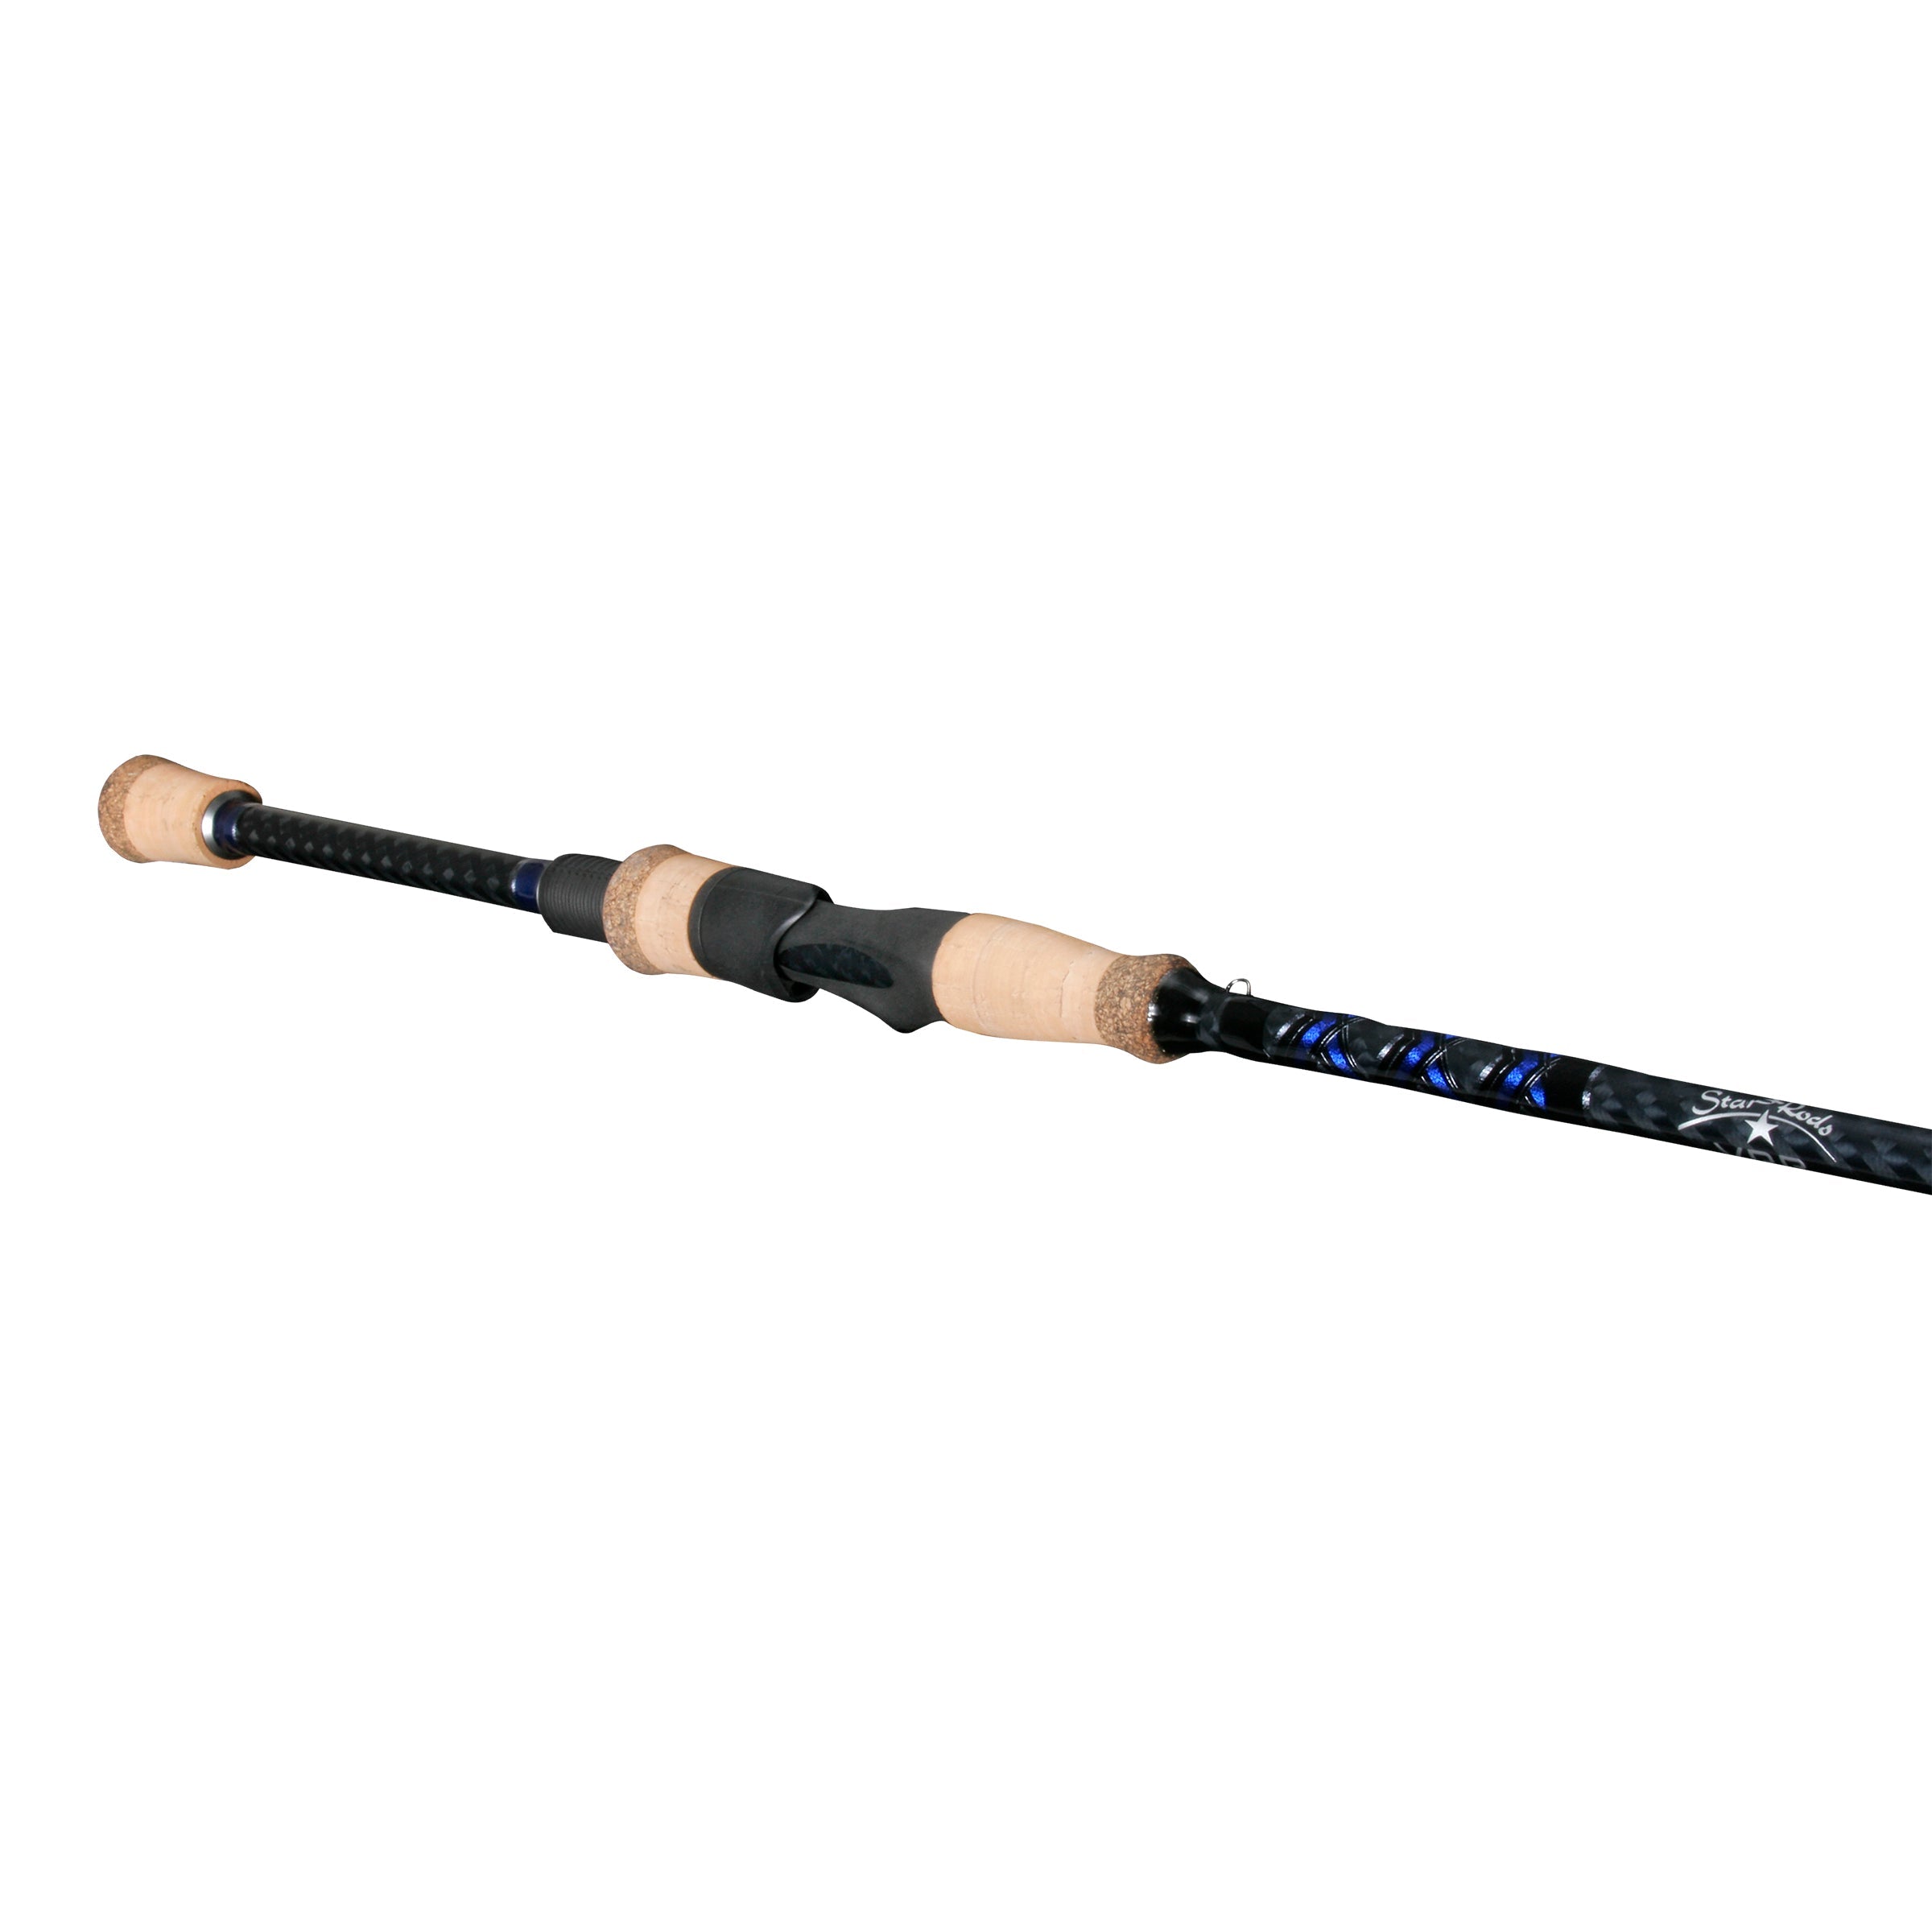 Star Rods Seagis 7' M Spinning Rod SK817FT70G